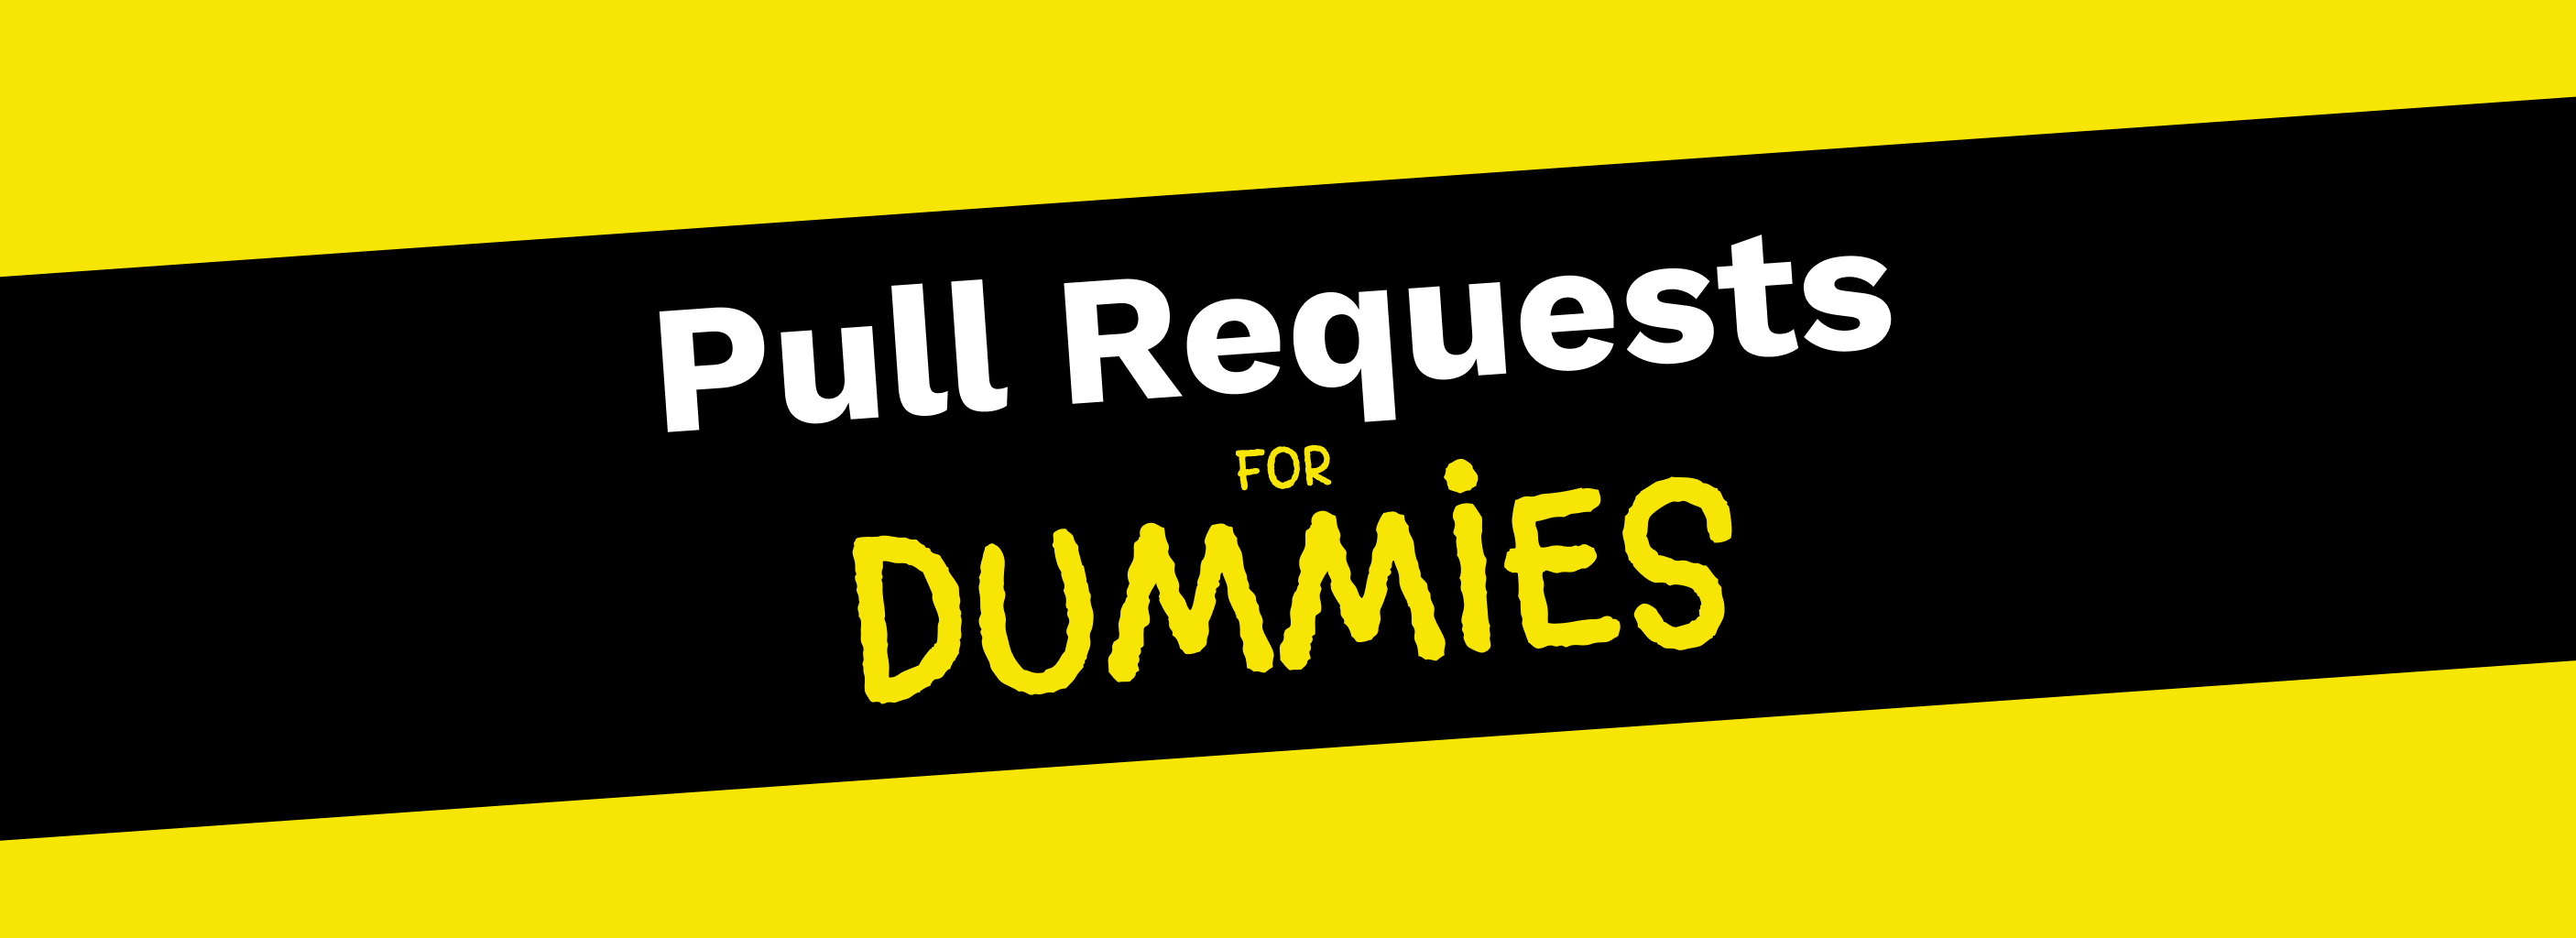 Pull Requests for Dummies